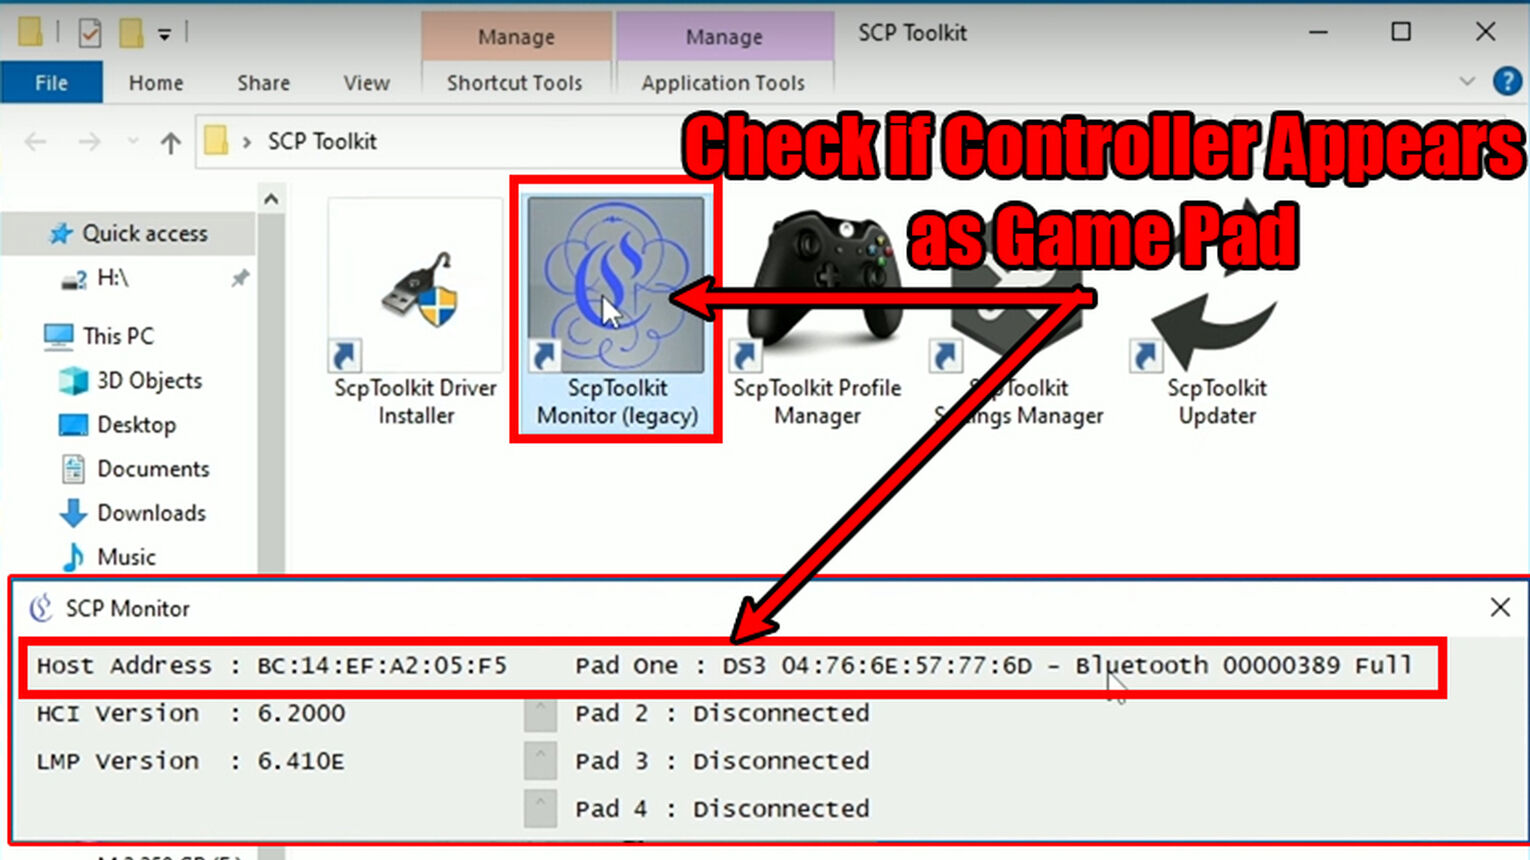 ScpToolkit Test and Check PS3 Controller